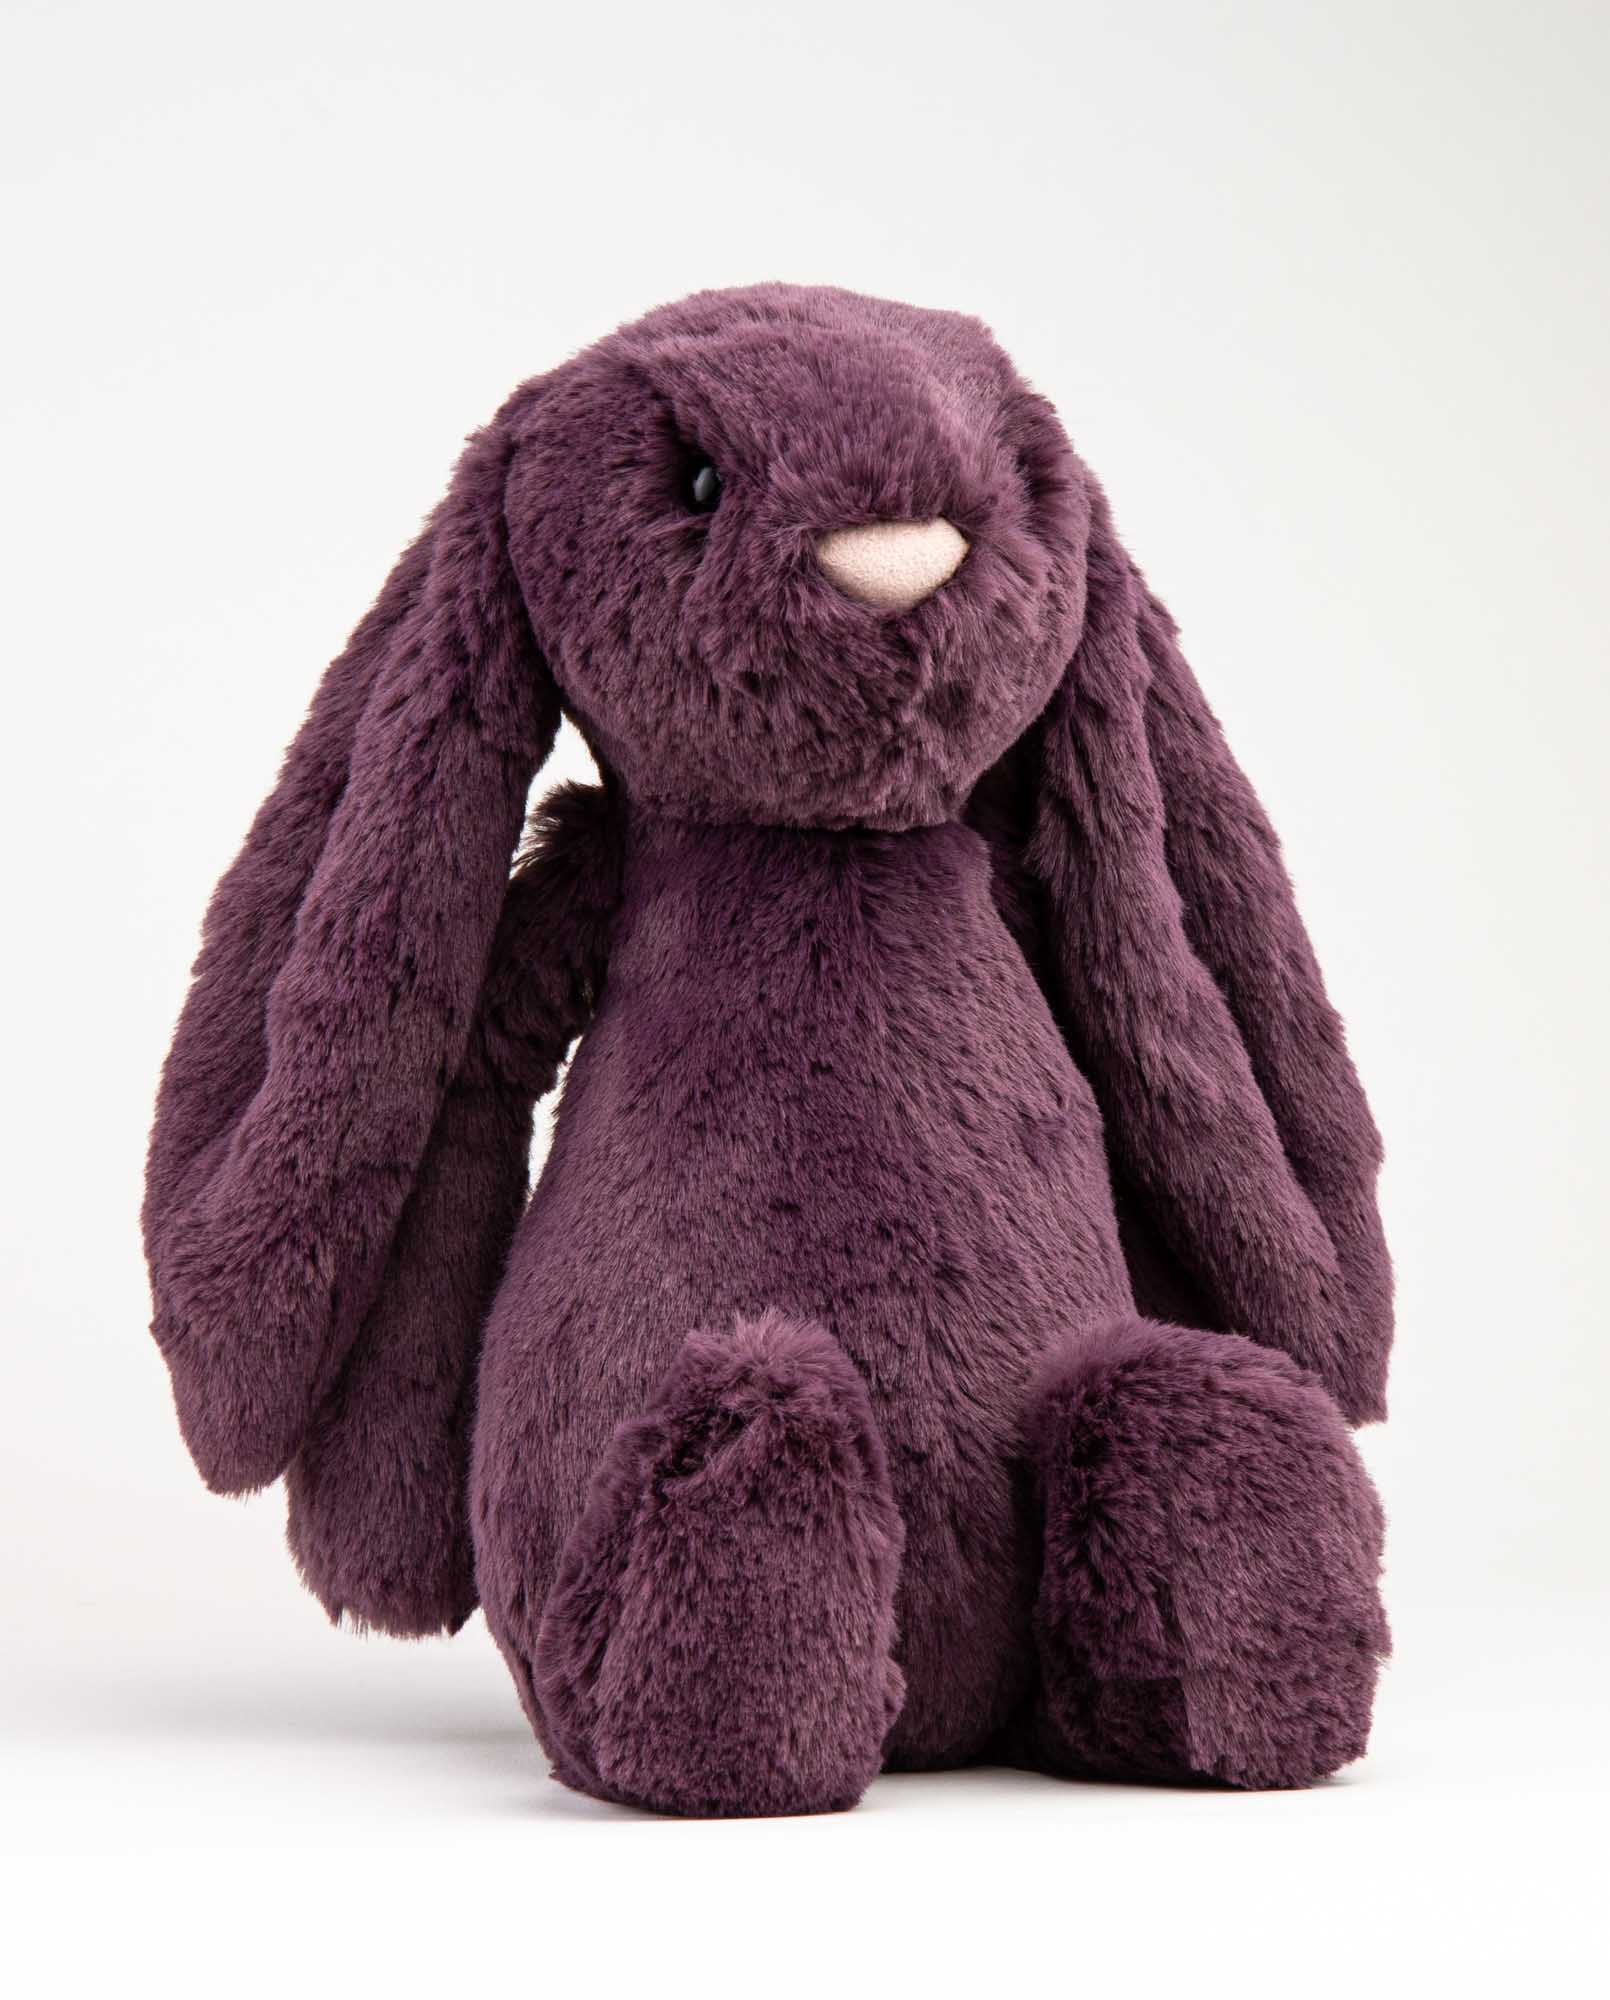 Jellycat Bunny Gift Delivery | Bashful Plum Bunny from Send a Cuddly